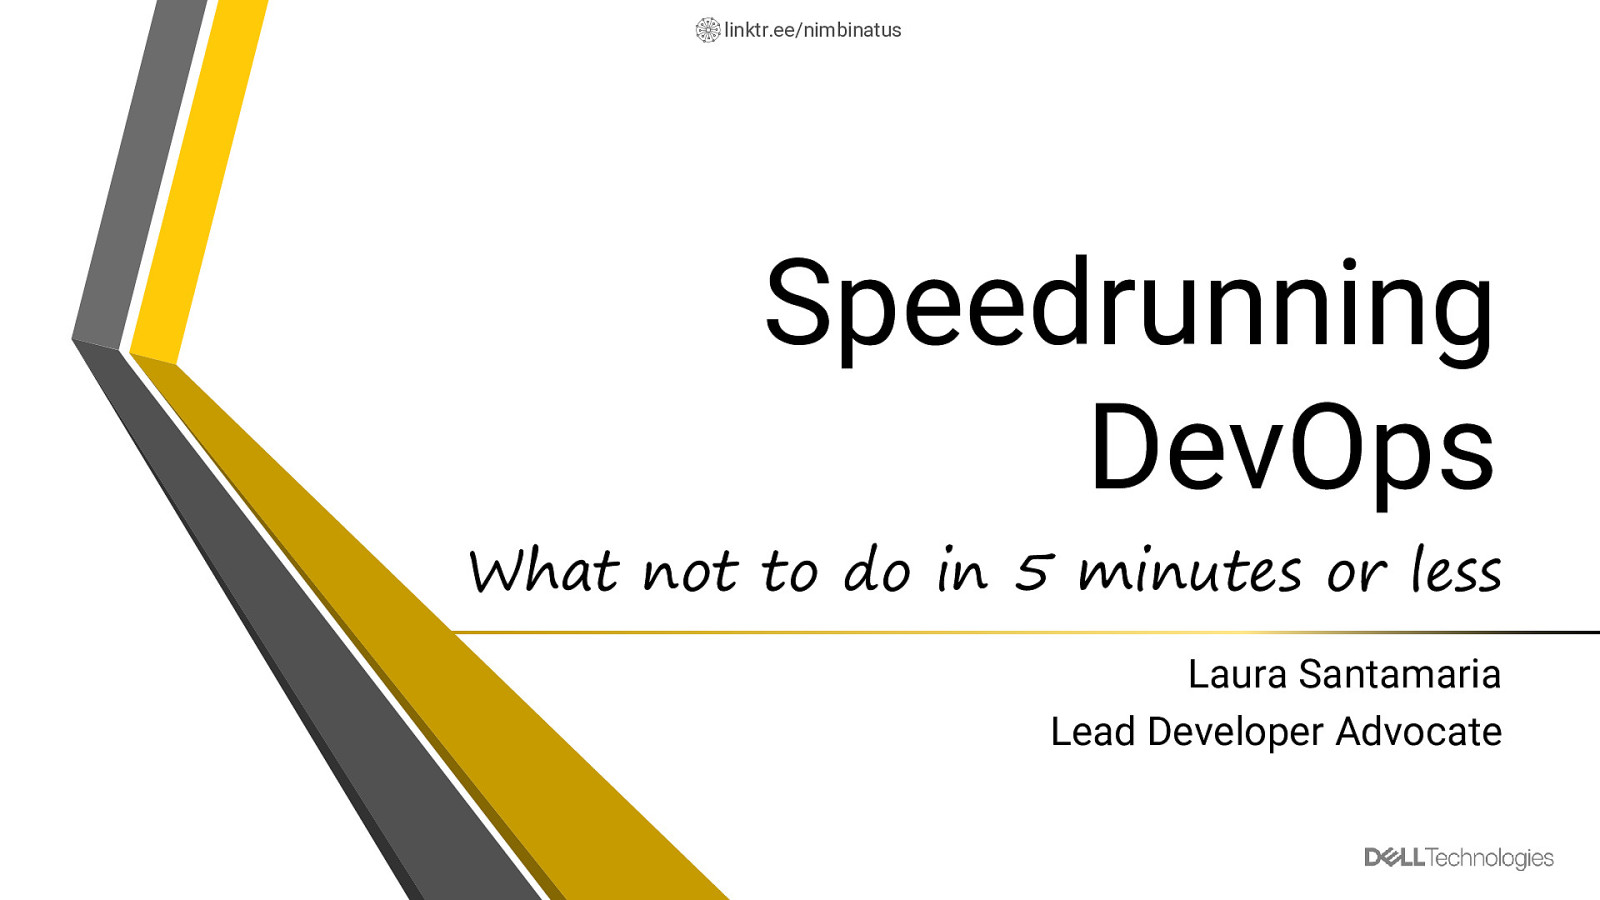 Speedrunning DevOps: What not to do in 5 minutes or less